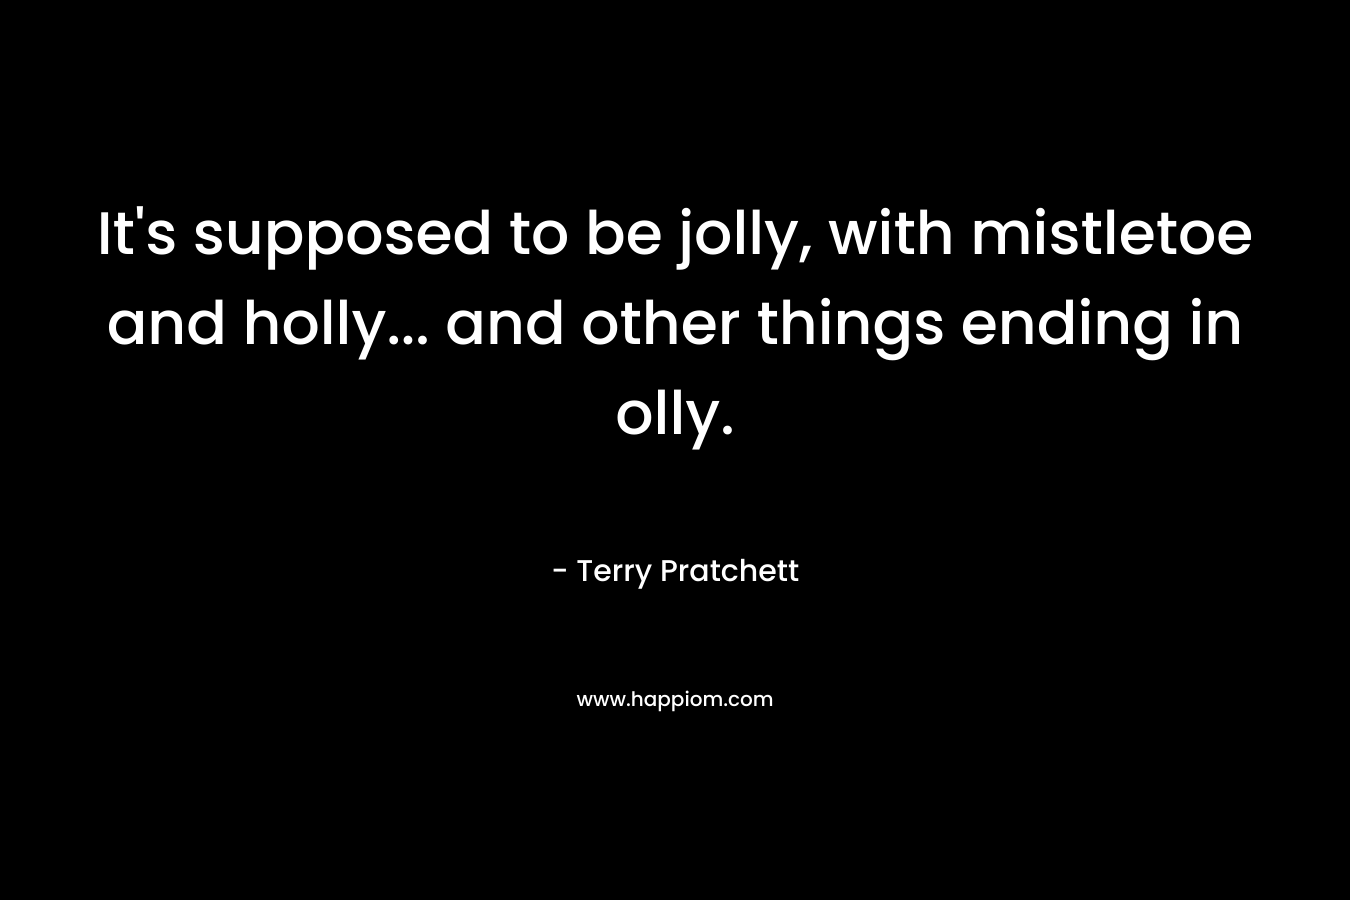 It’s supposed to be jolly, with mistletoe and holly… and other things ending in olly. – Terry Pratchett